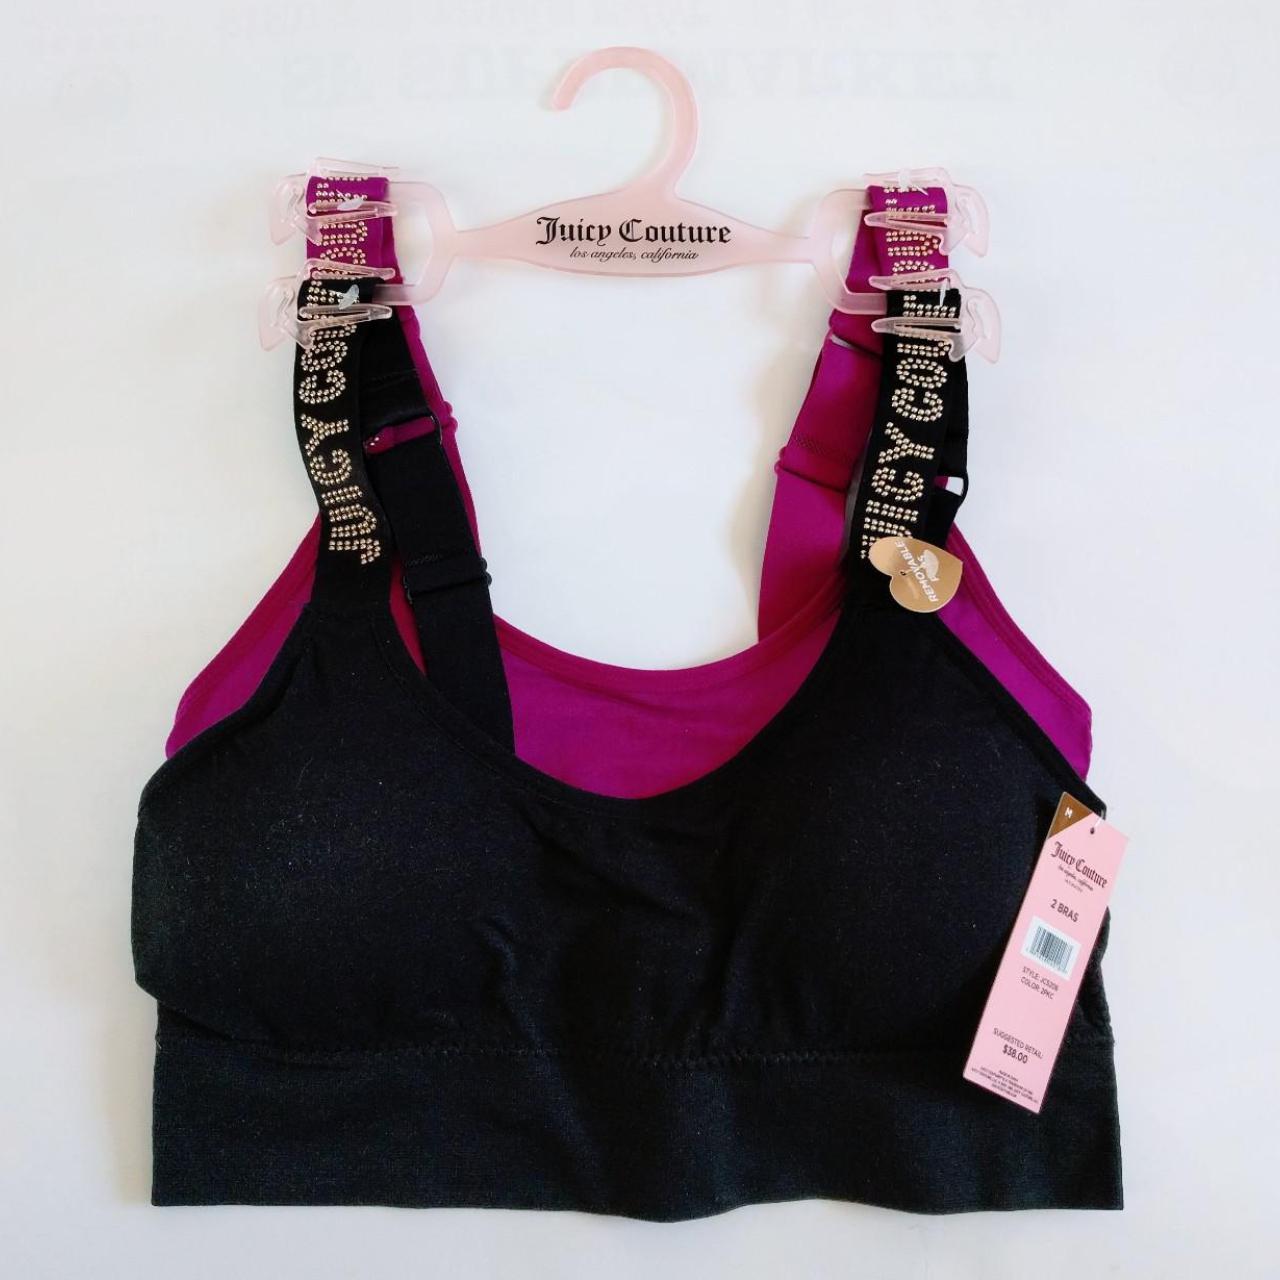 Juicy Couture, Intimates & Sleepwear, Juicy Couture Brand New Bras